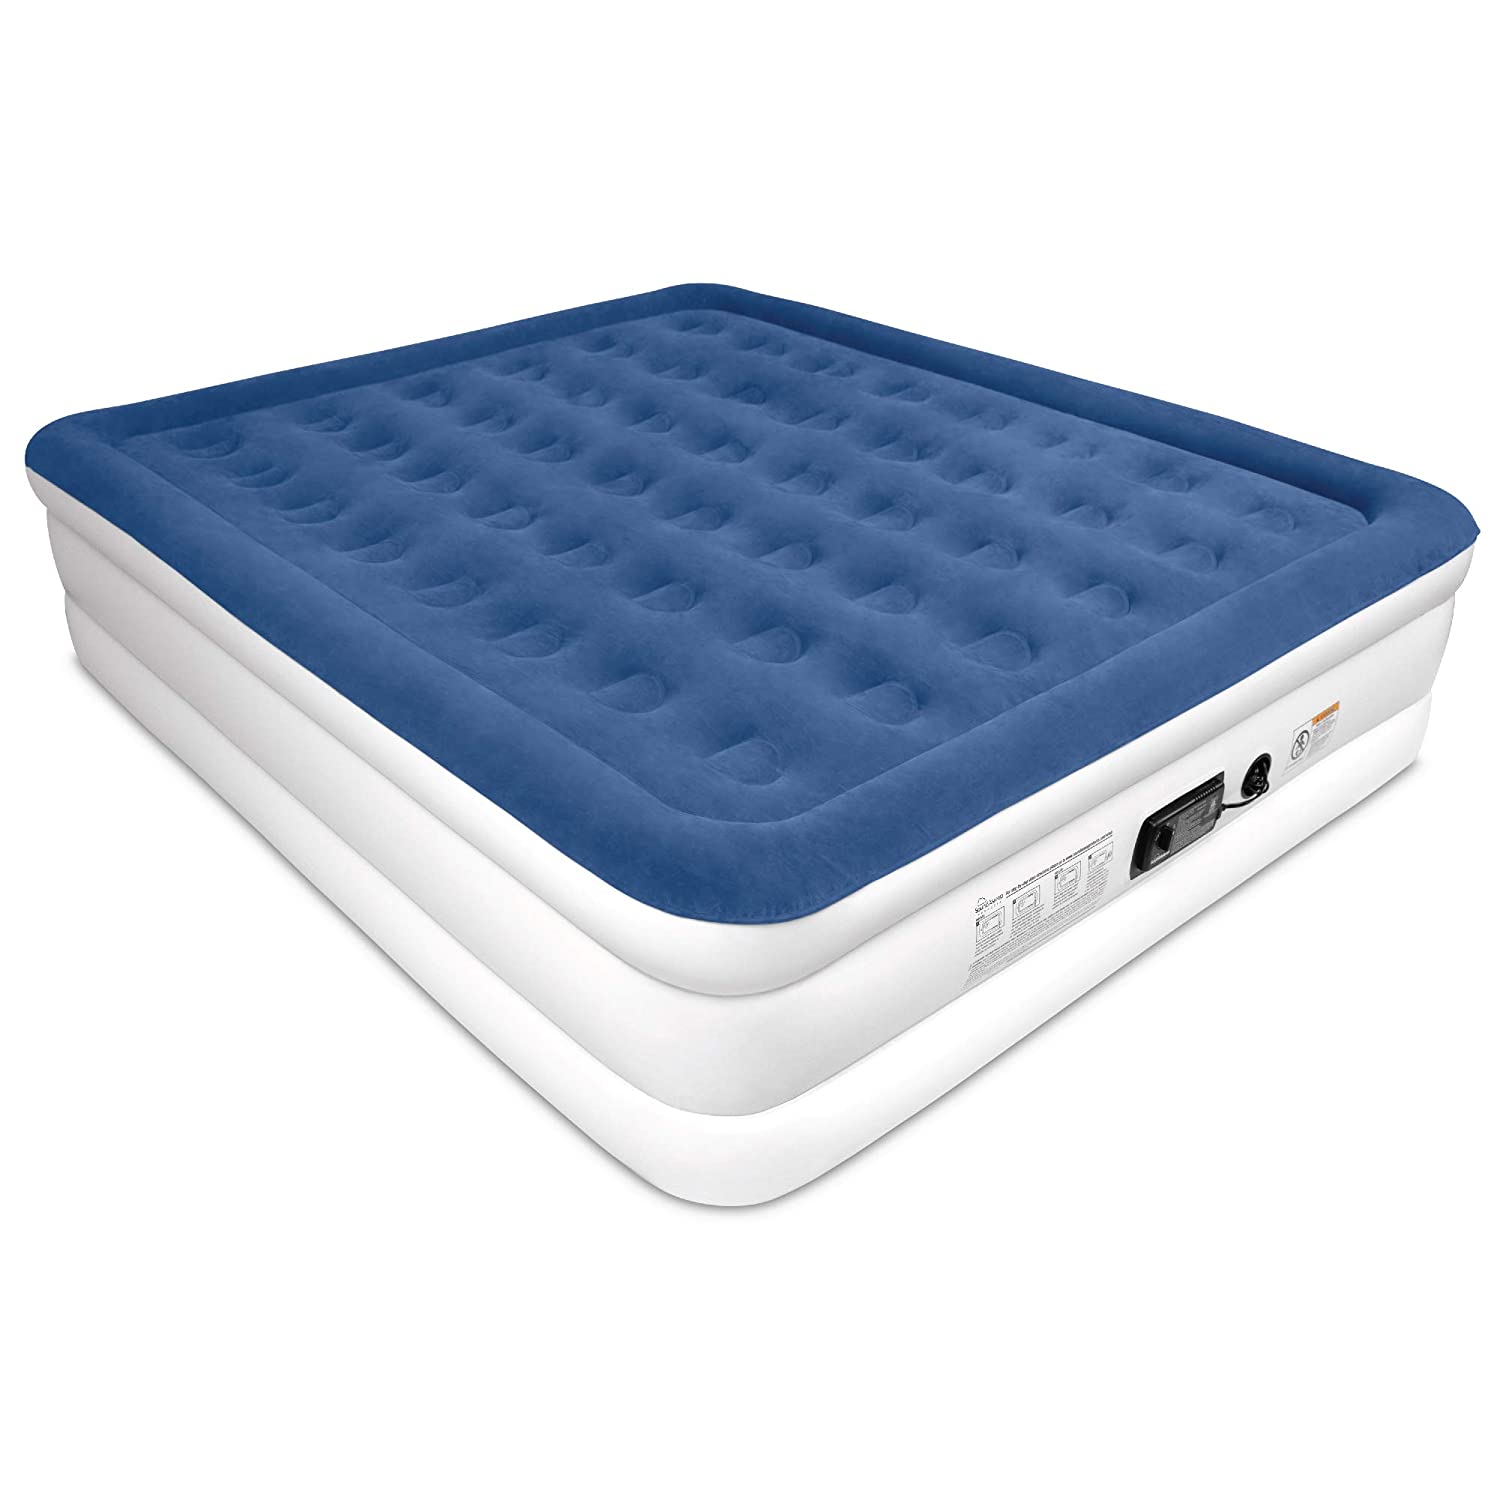 Best Heavy Duty Air Mattresses Over 300 Lbs For Heavy ...